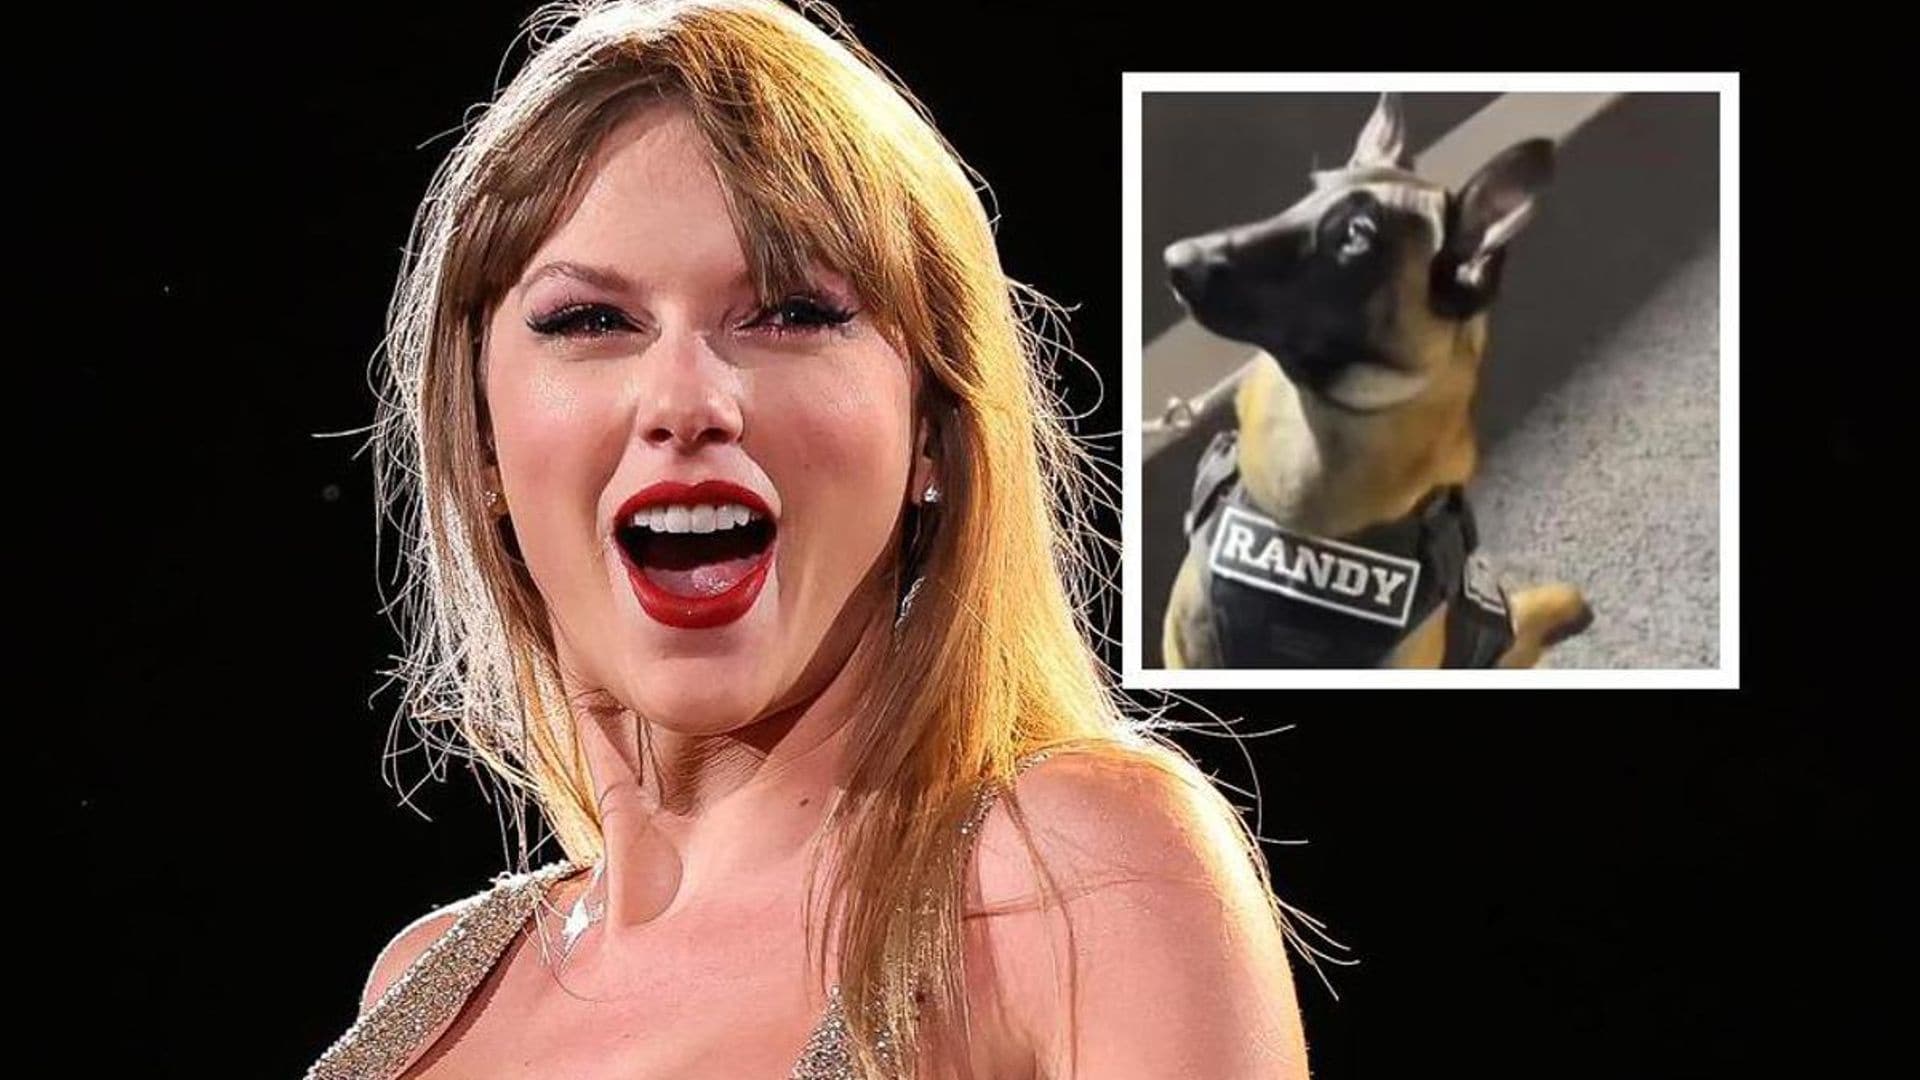 Pet of the Week: This dog stole the show at Taylor Swift’s concert in Mexico for his friendship bracelets